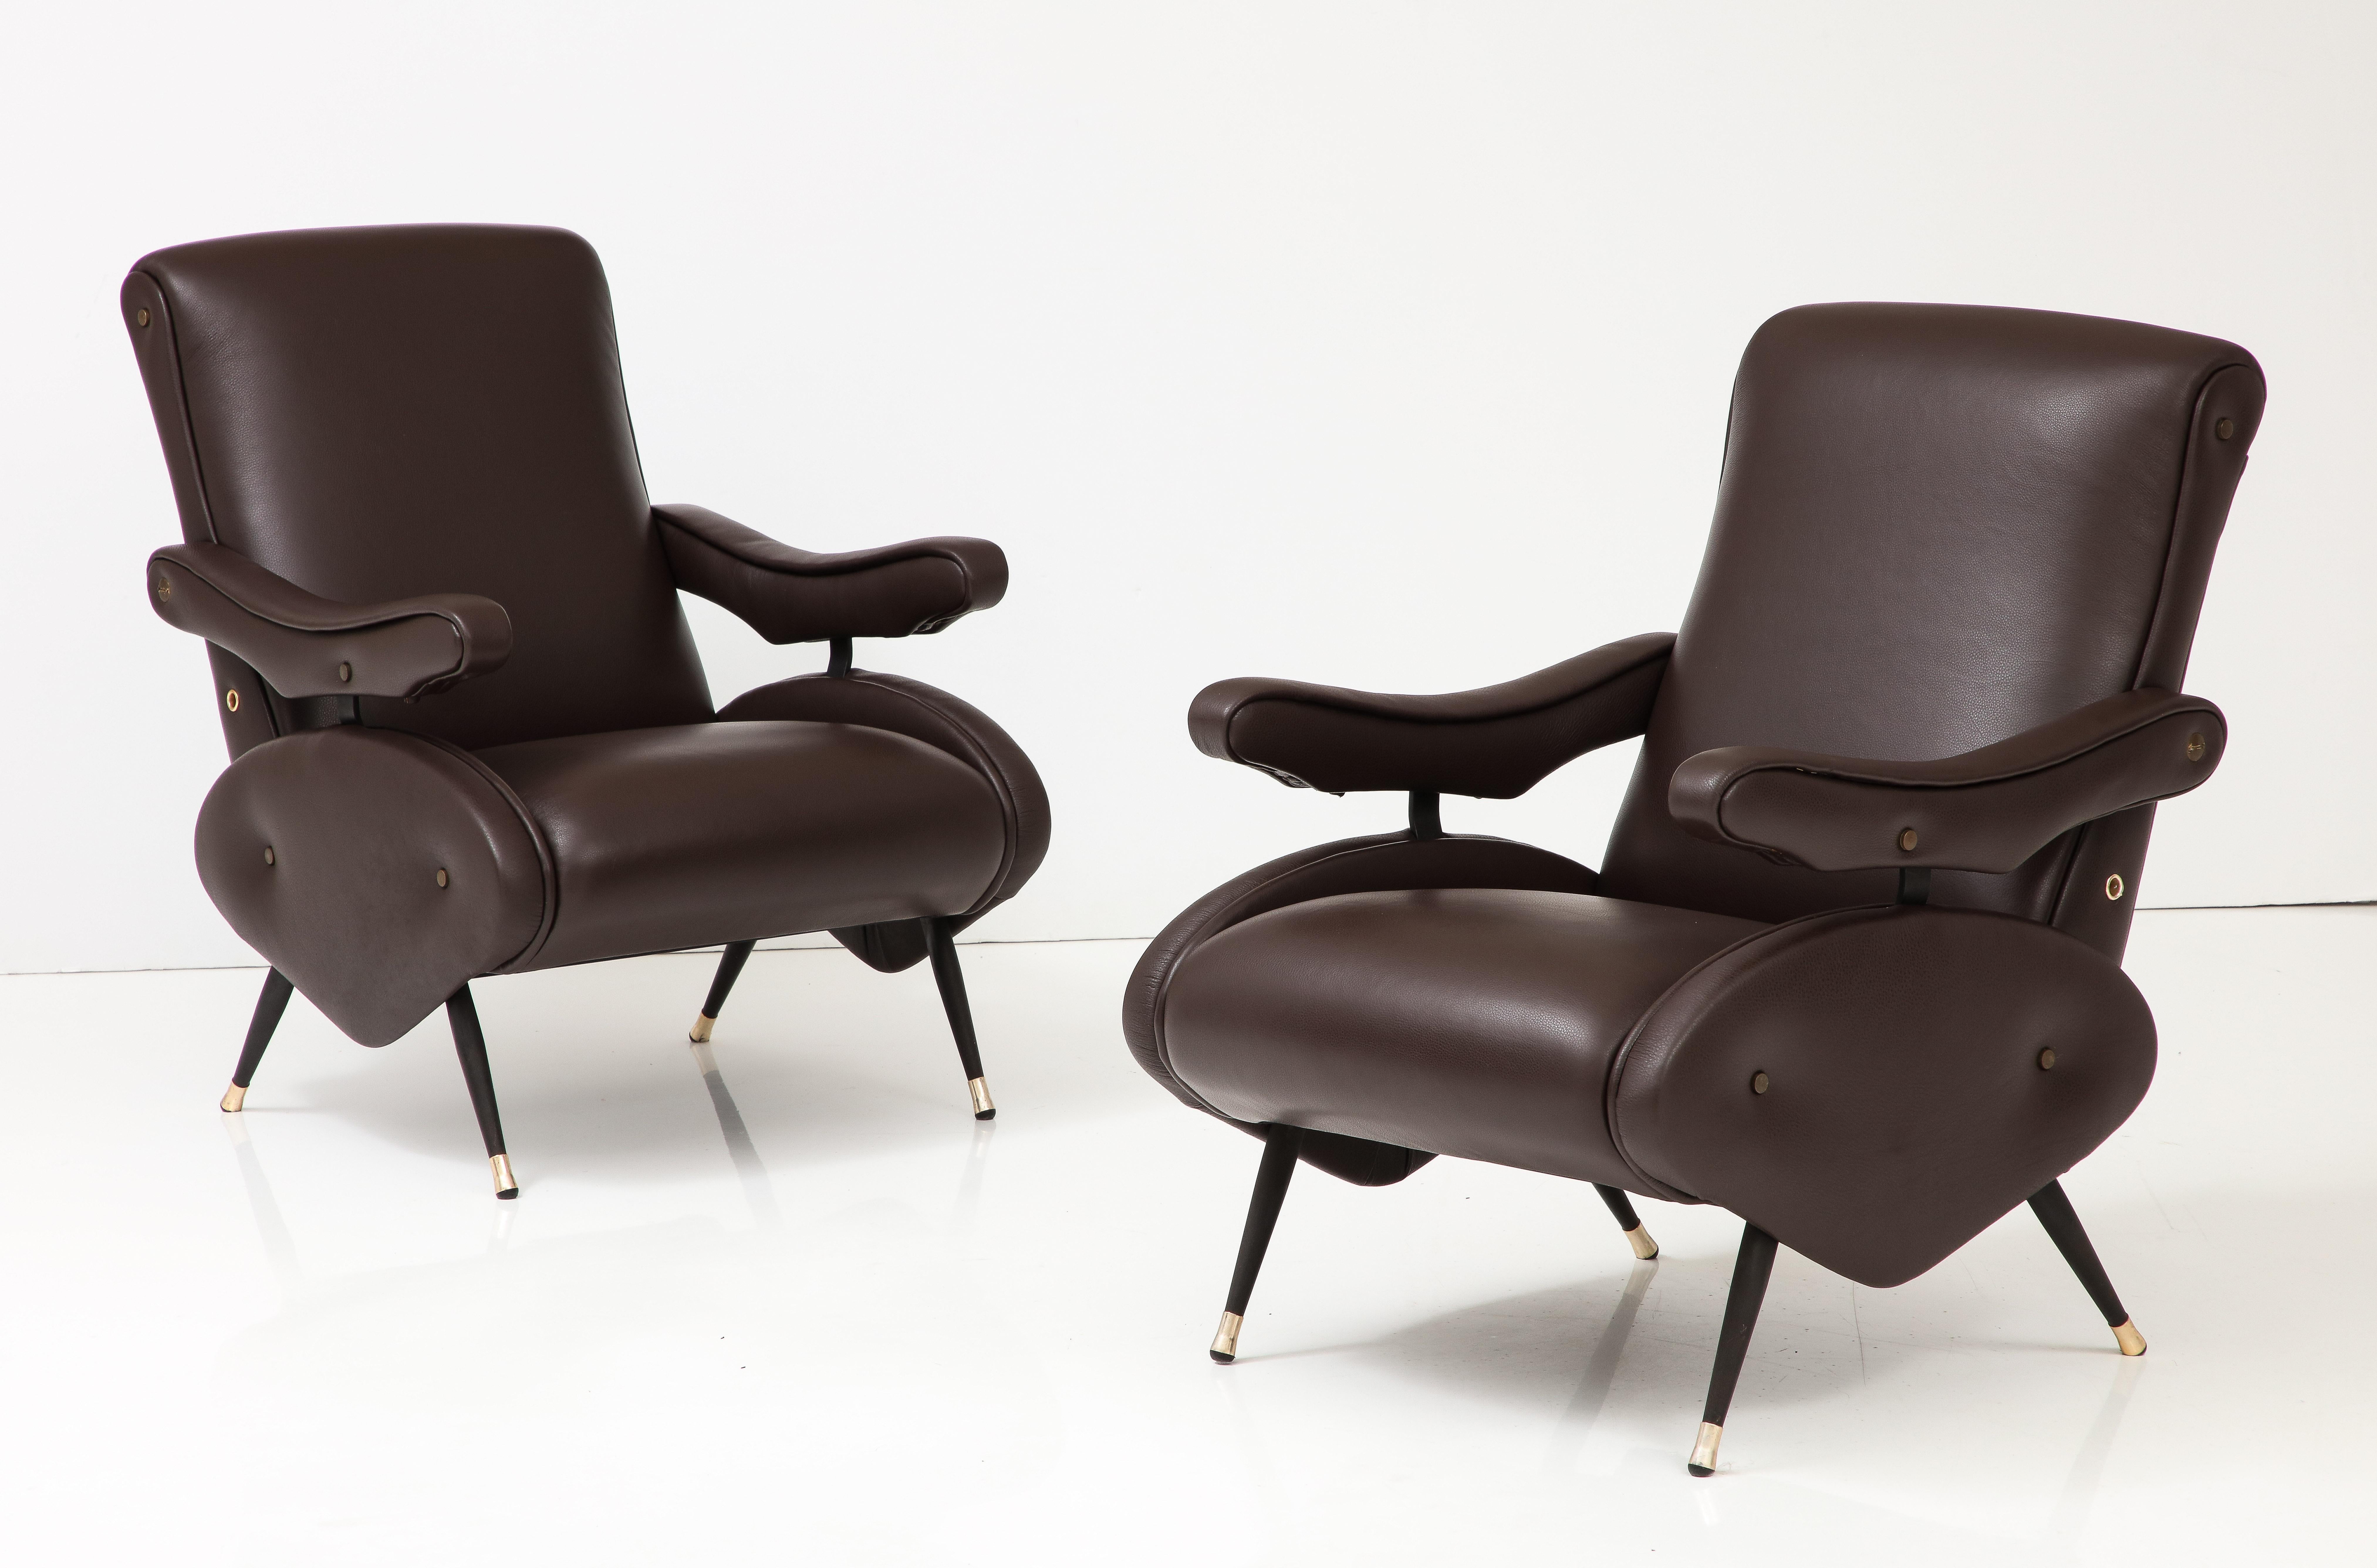 Nello Pini for Novarredo, Pair of Reclining Leather Lounge Chairs, Italy 1959  For Sale 5